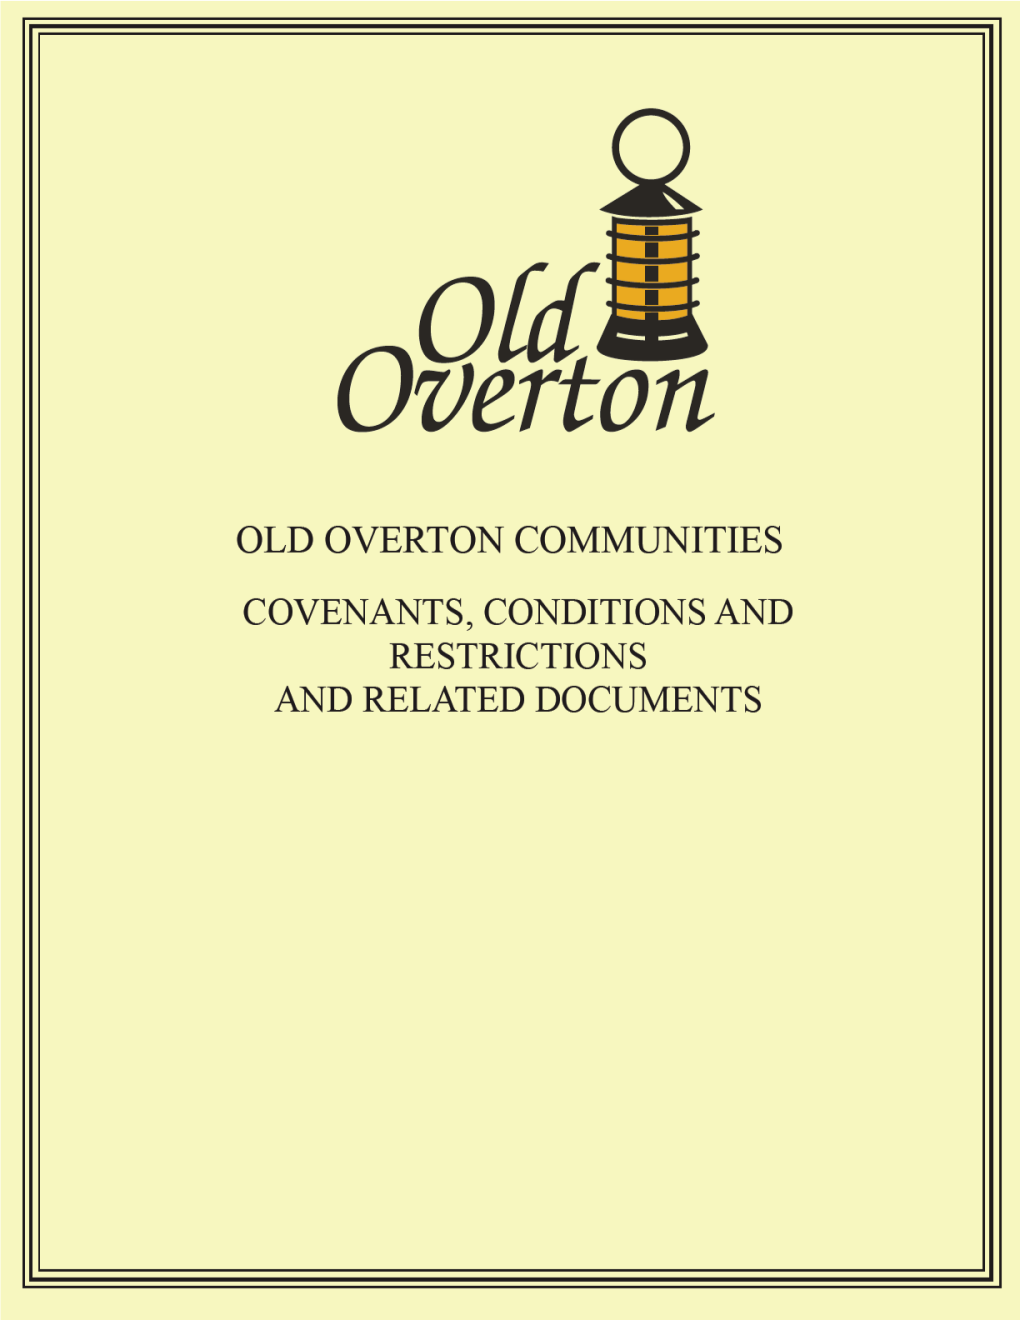 Old Overton Covenants, Conditions and Restrictions